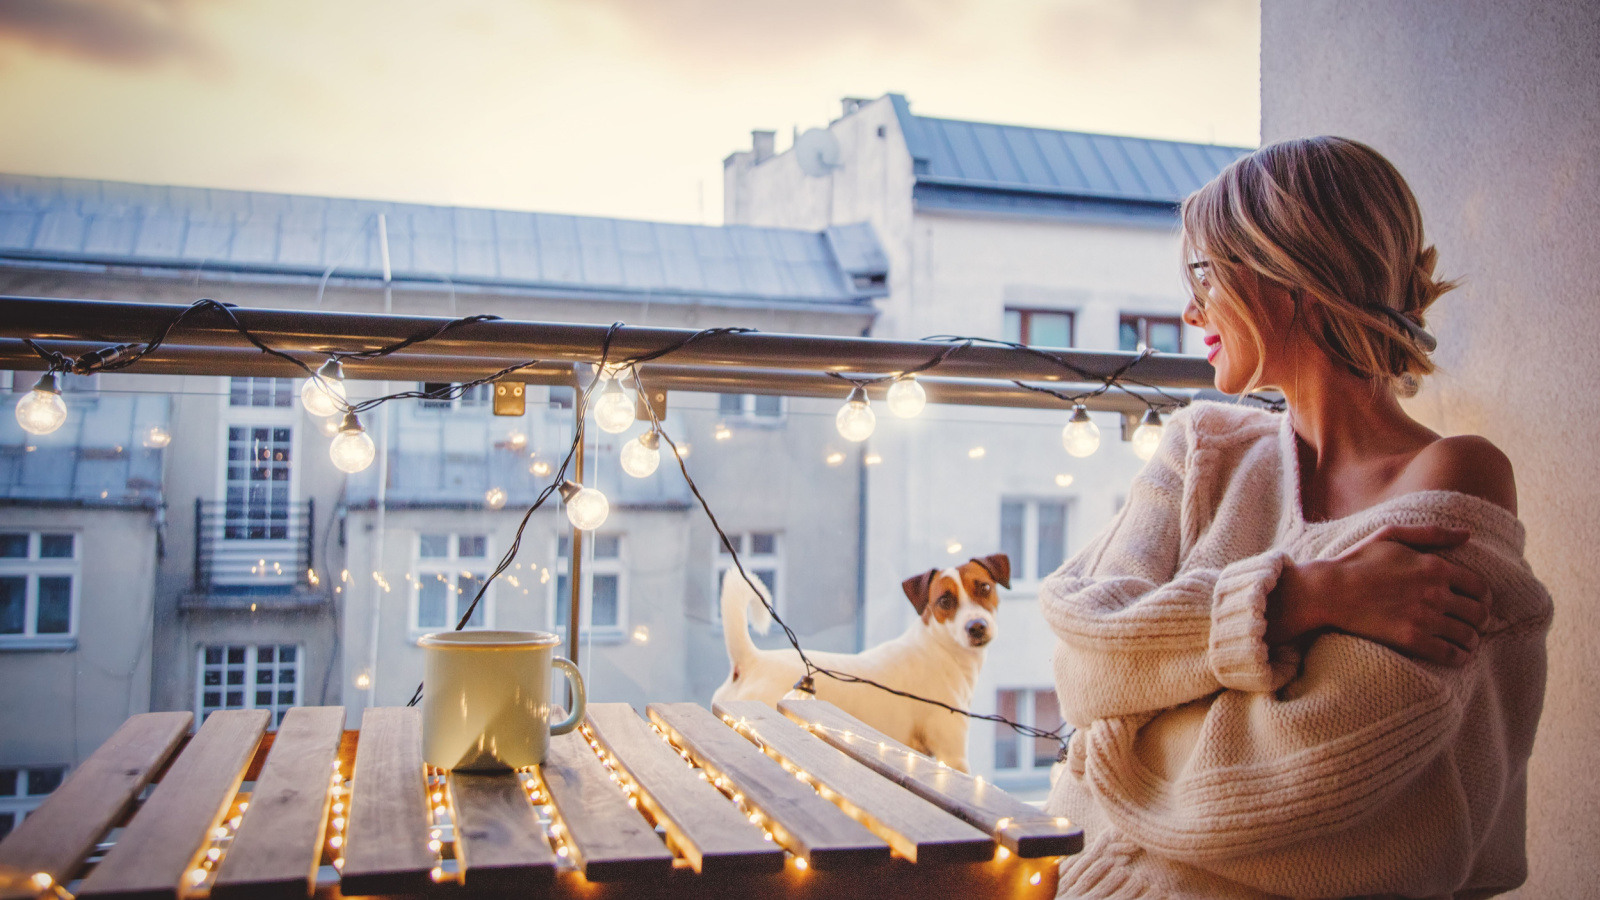 image credit: Masson/Shutterstock <p><span>Soft, ambient lighting can work wonders in creating a serene balcony space. Consider string lights, lanterns, or LED candles to provide a warm, inviting glow. These lights illuminate the space gently and add a cozy, magical feel, perfect for evening relaxation.</span></p>